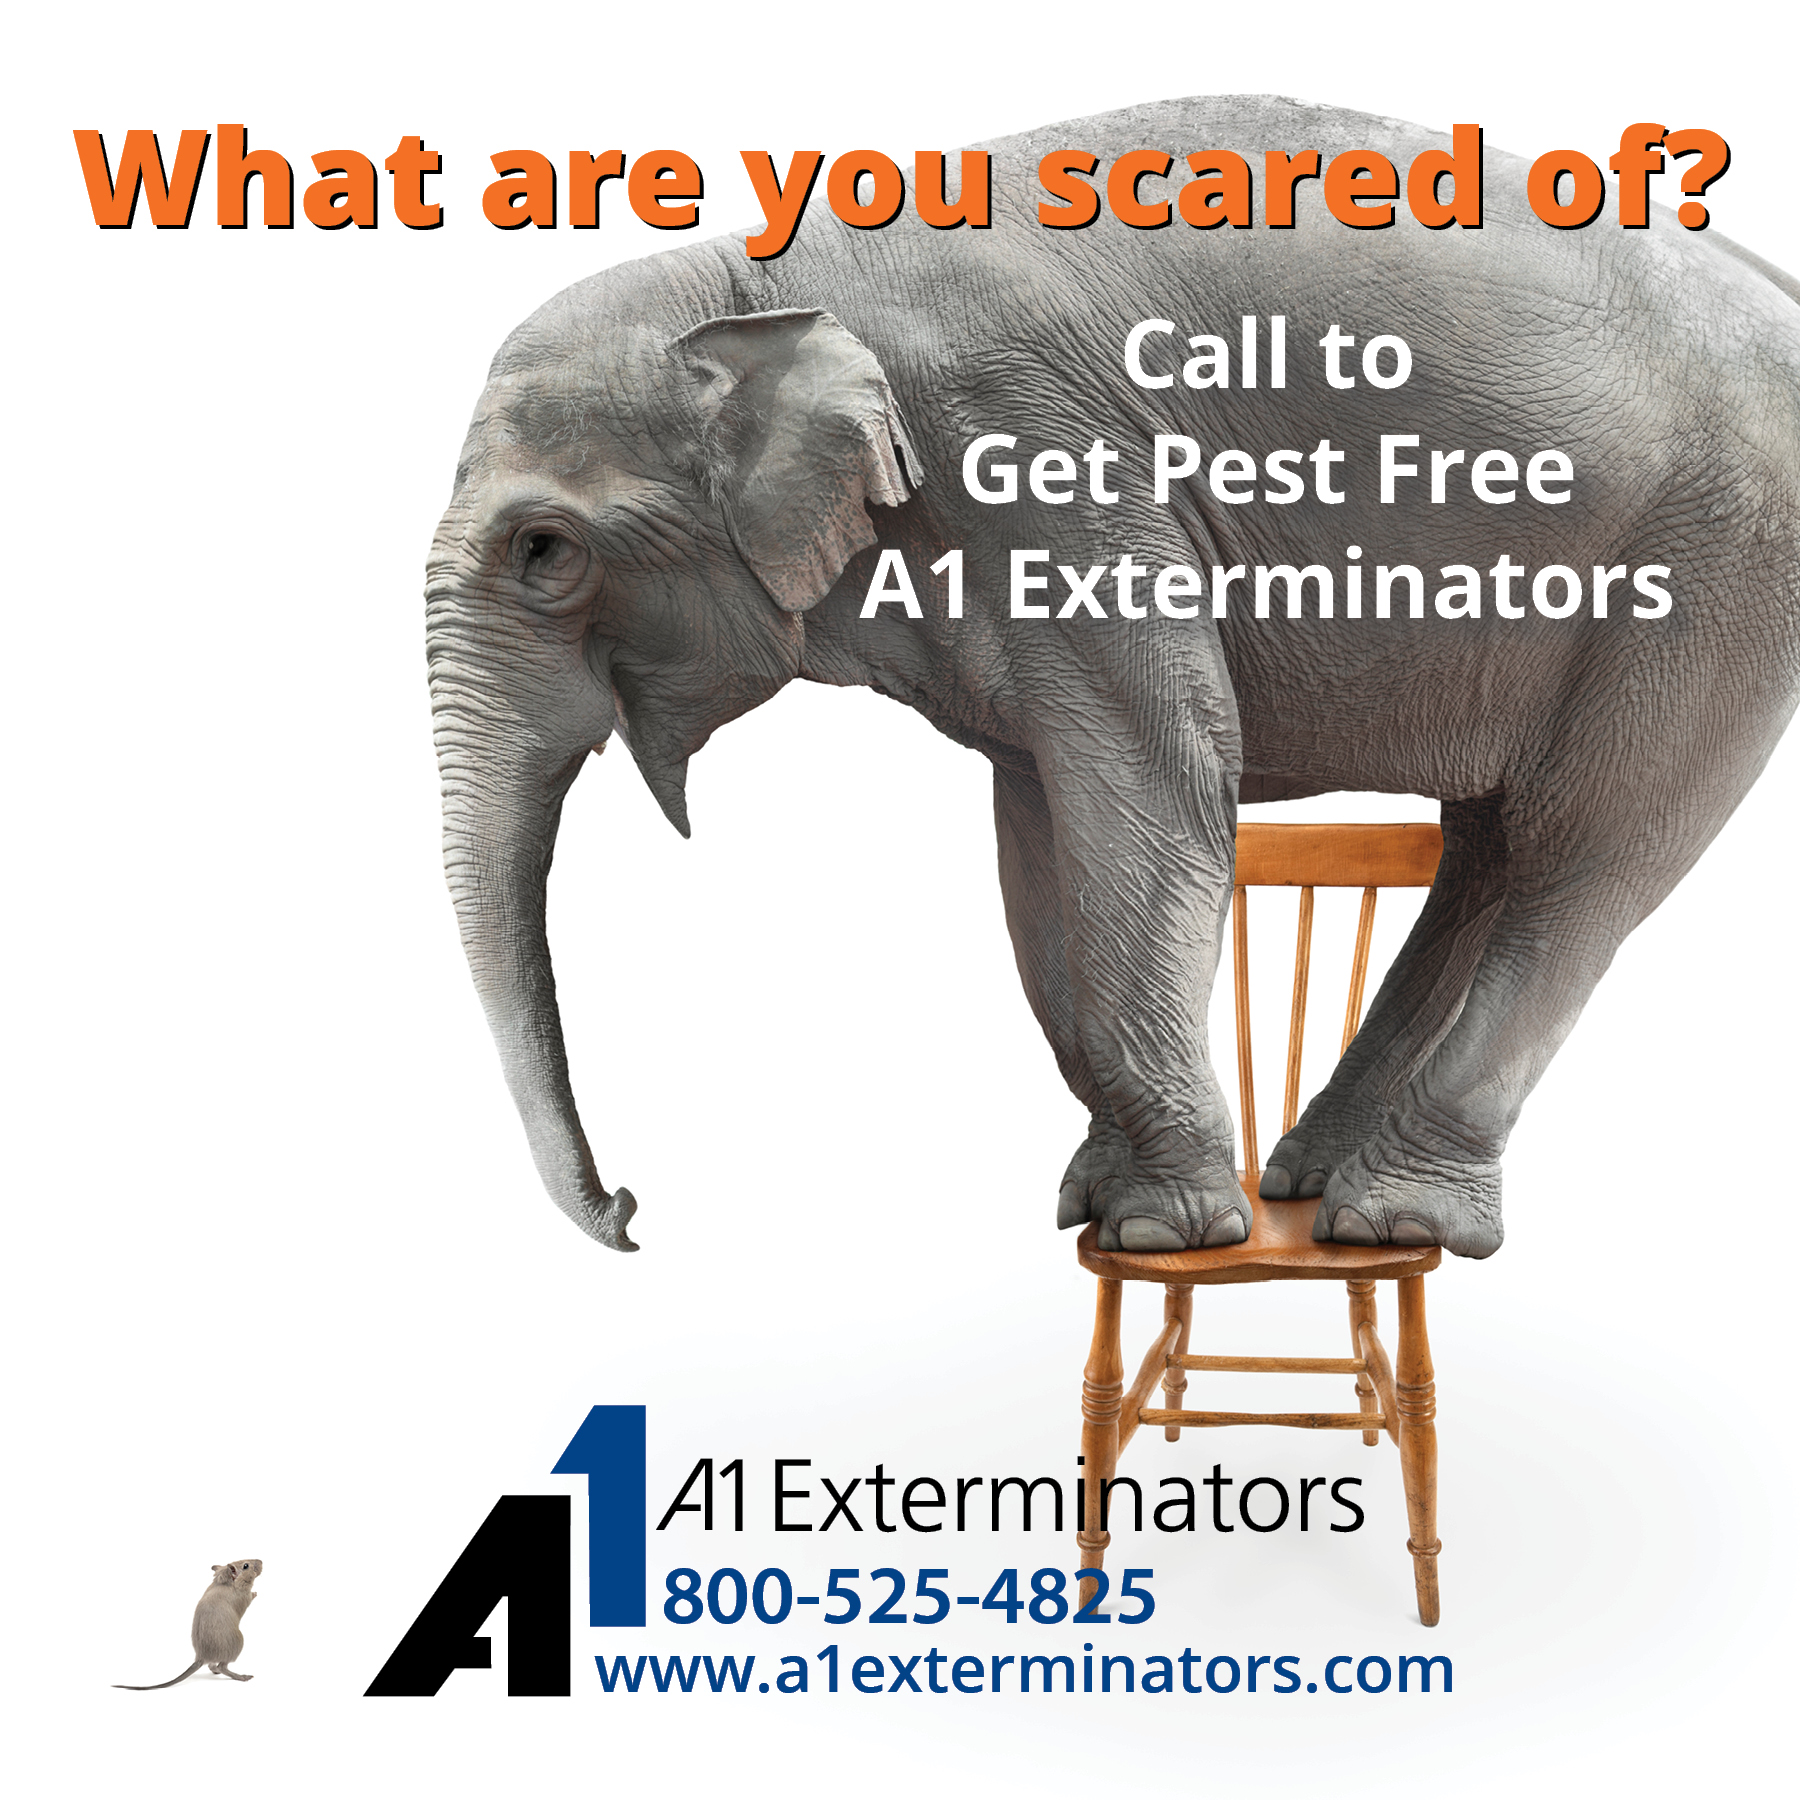 Elephant standing on chair afraid of mouse. "What are you scared of? Call to get pest free A1 Exterminators" [A1 Logo]